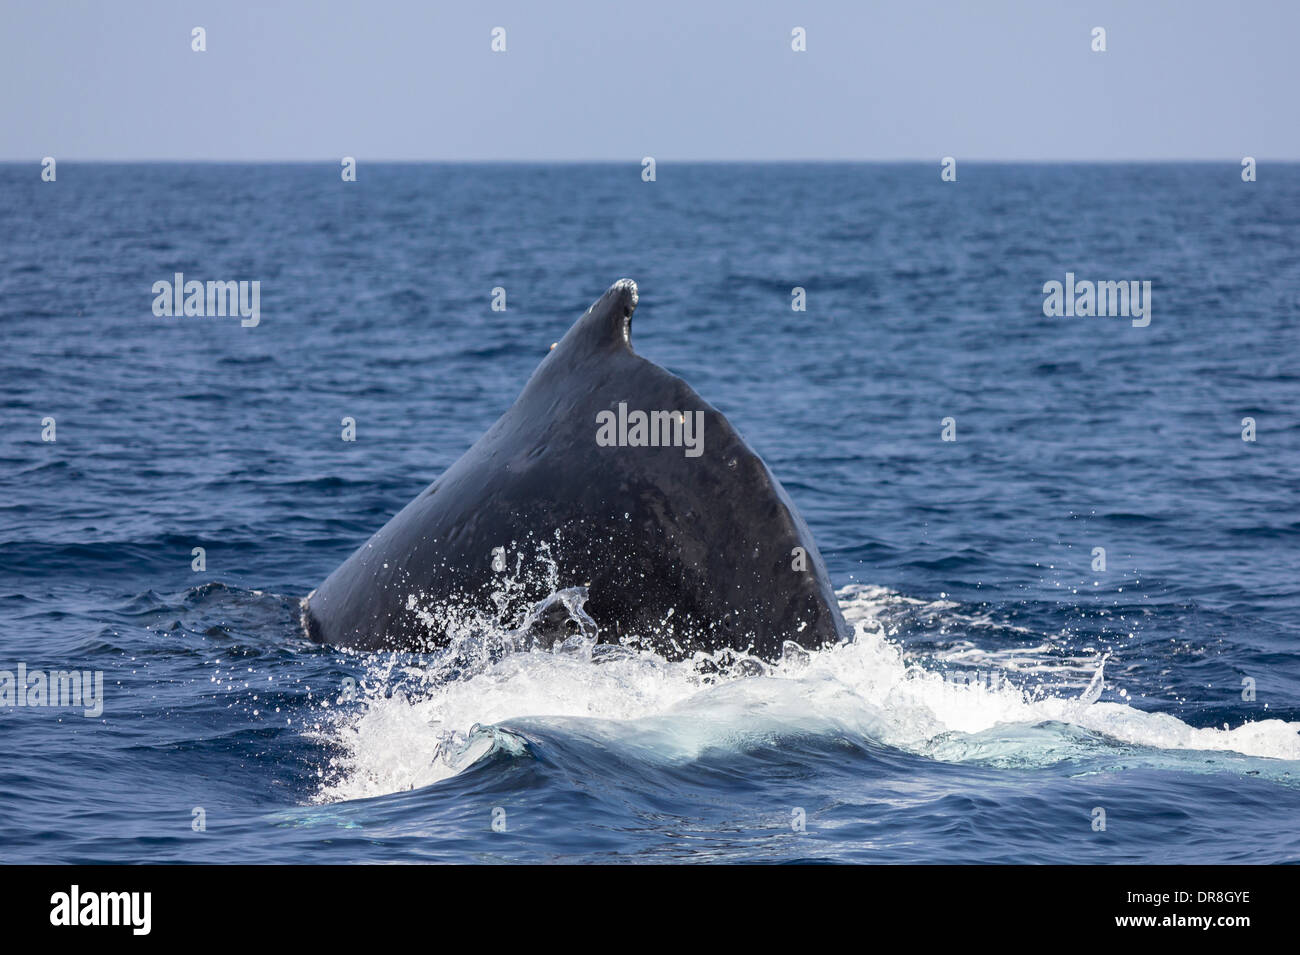 Humpback whale diving into the sea, Okinawa Prefecture, Japan Stock Photo